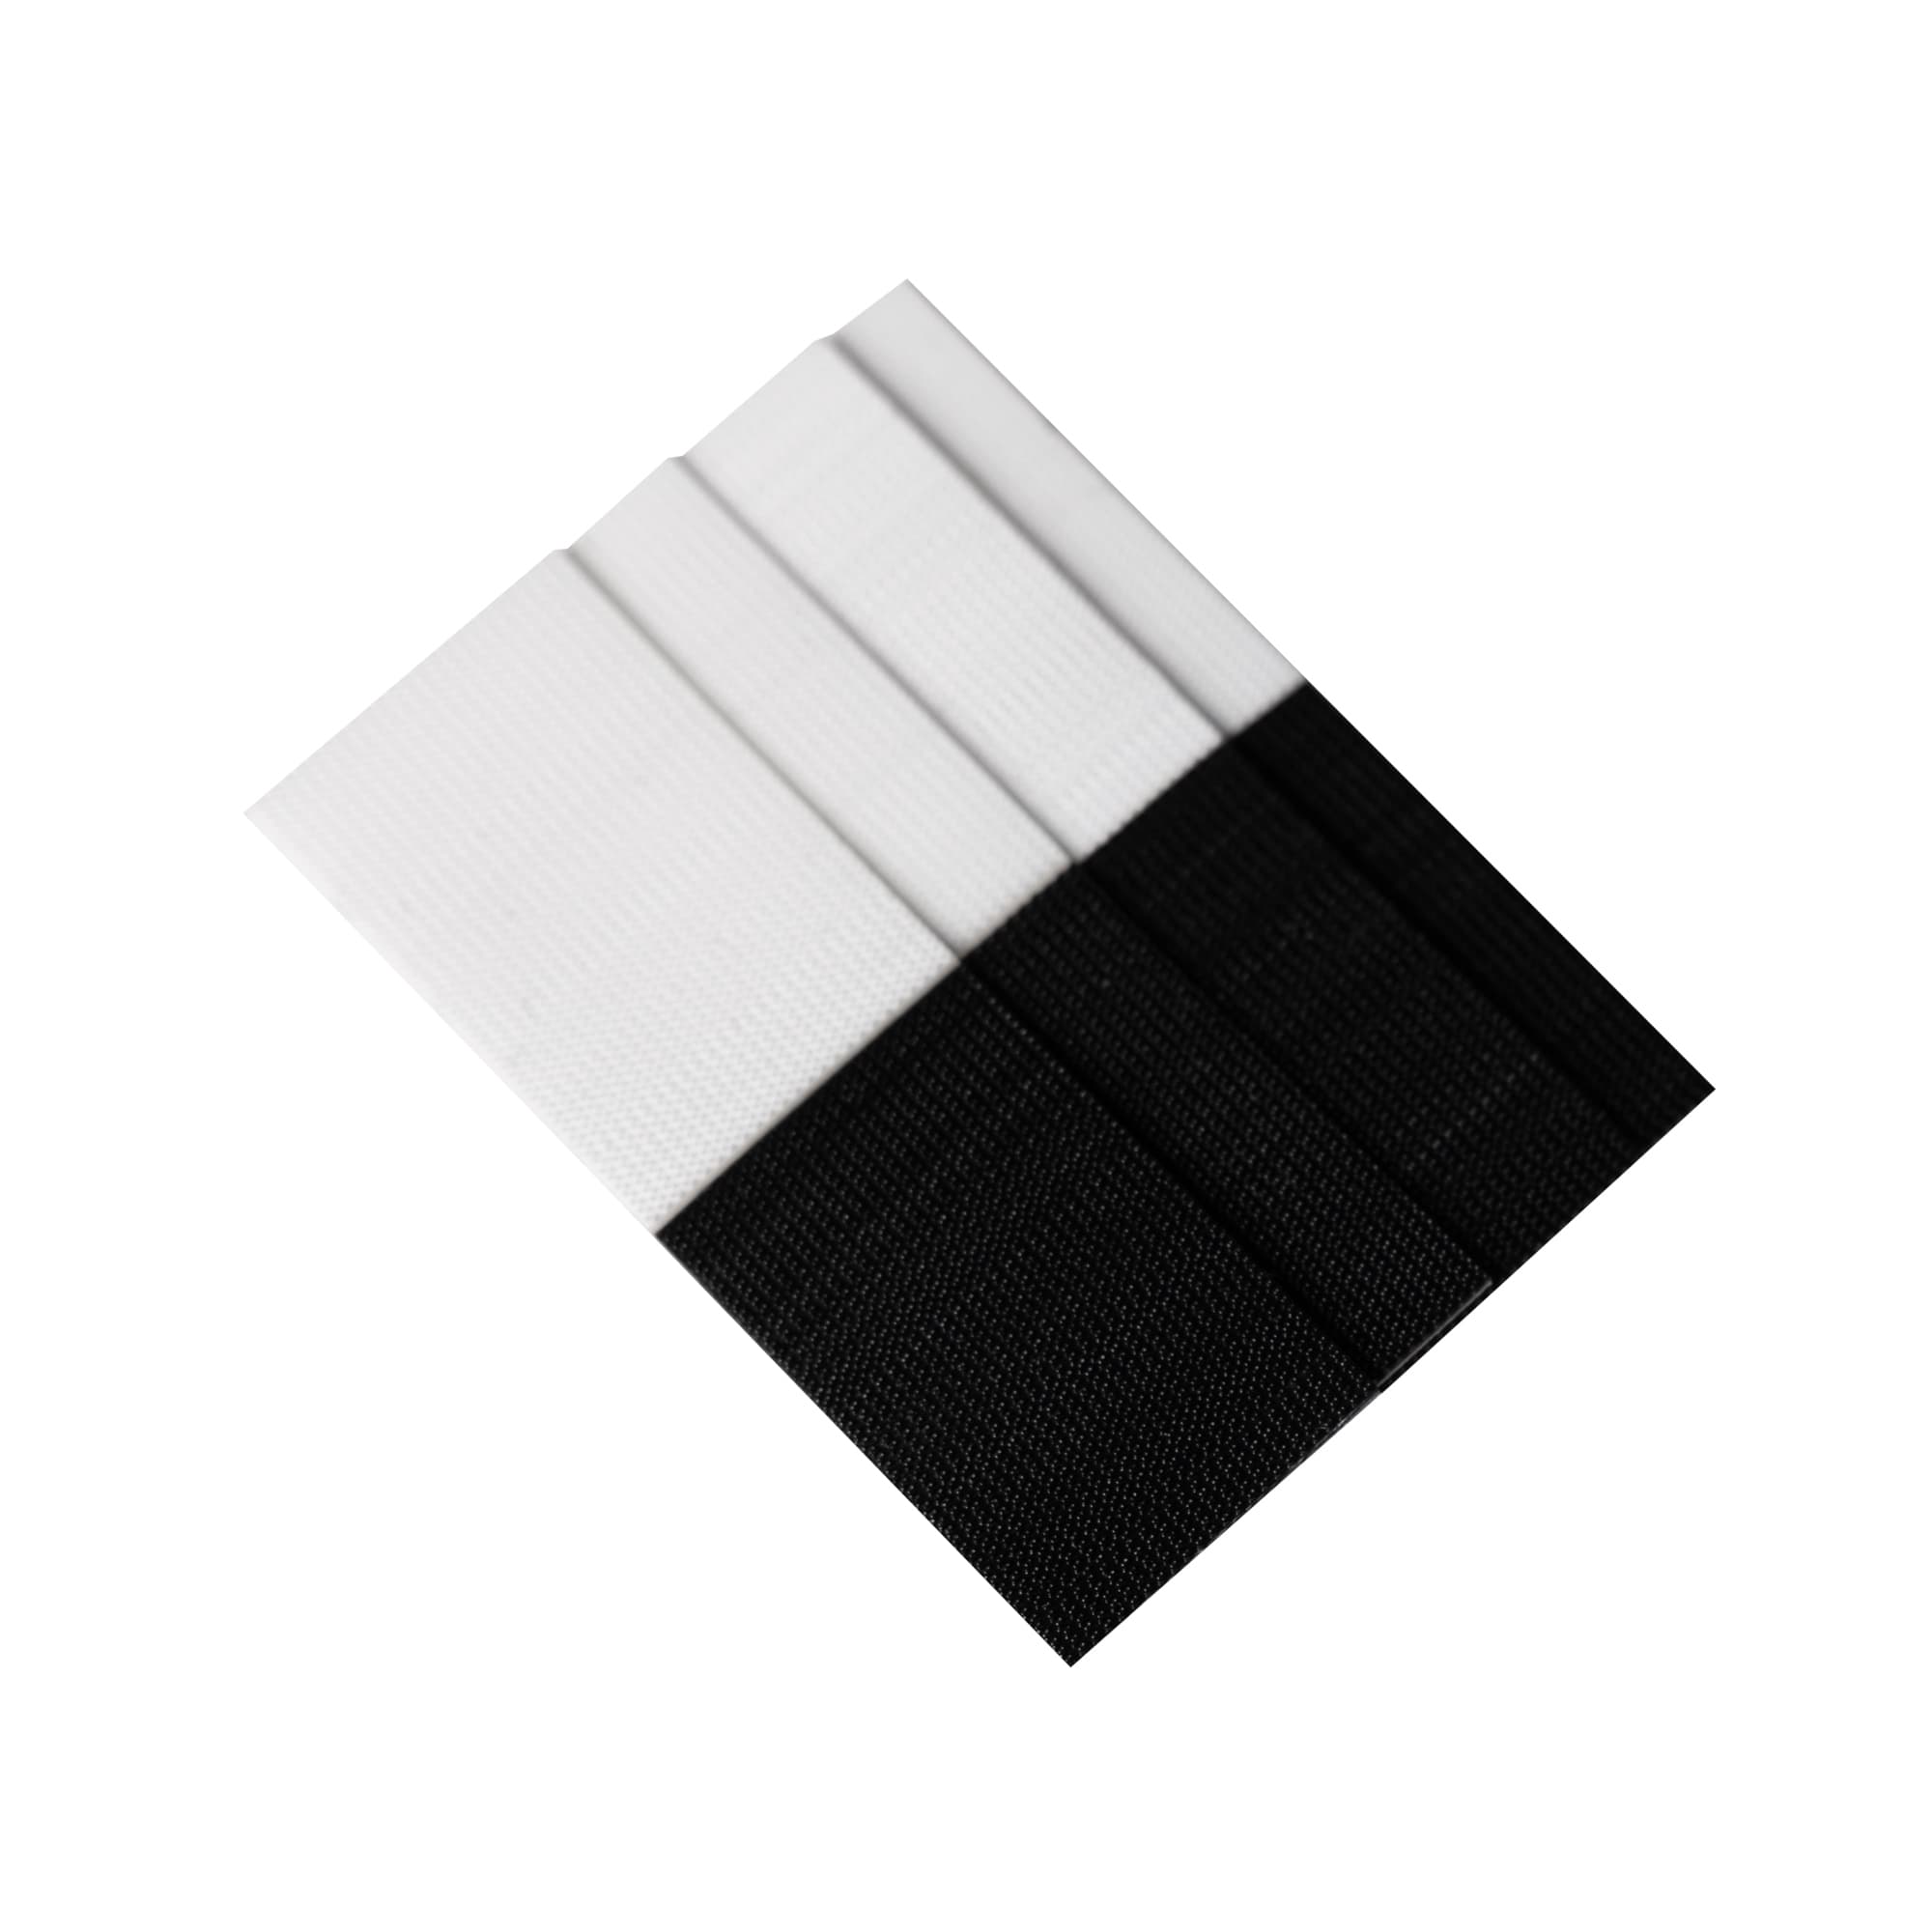 REPLACEMENT VELCRO TRACK TABS